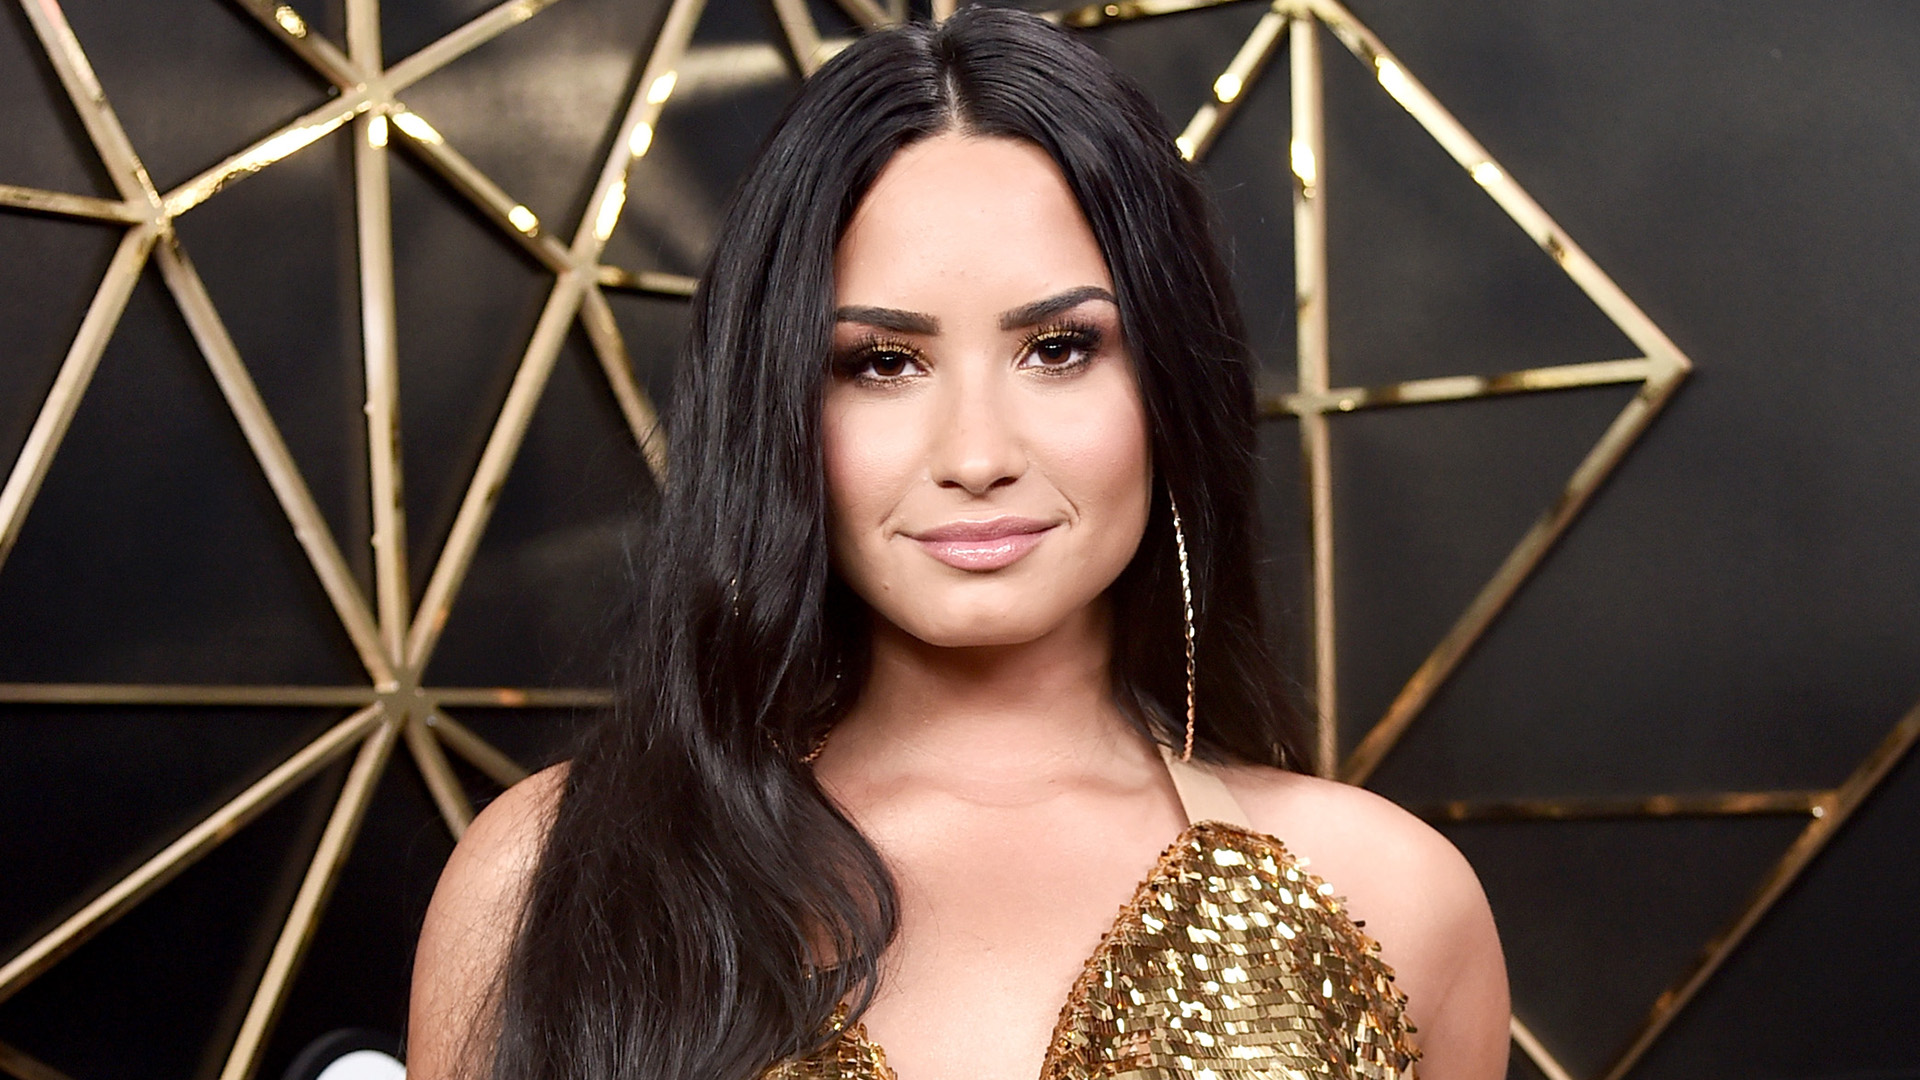 Demi Lovato Accused of Photoshopping Boobs Bigger | StyleCaster